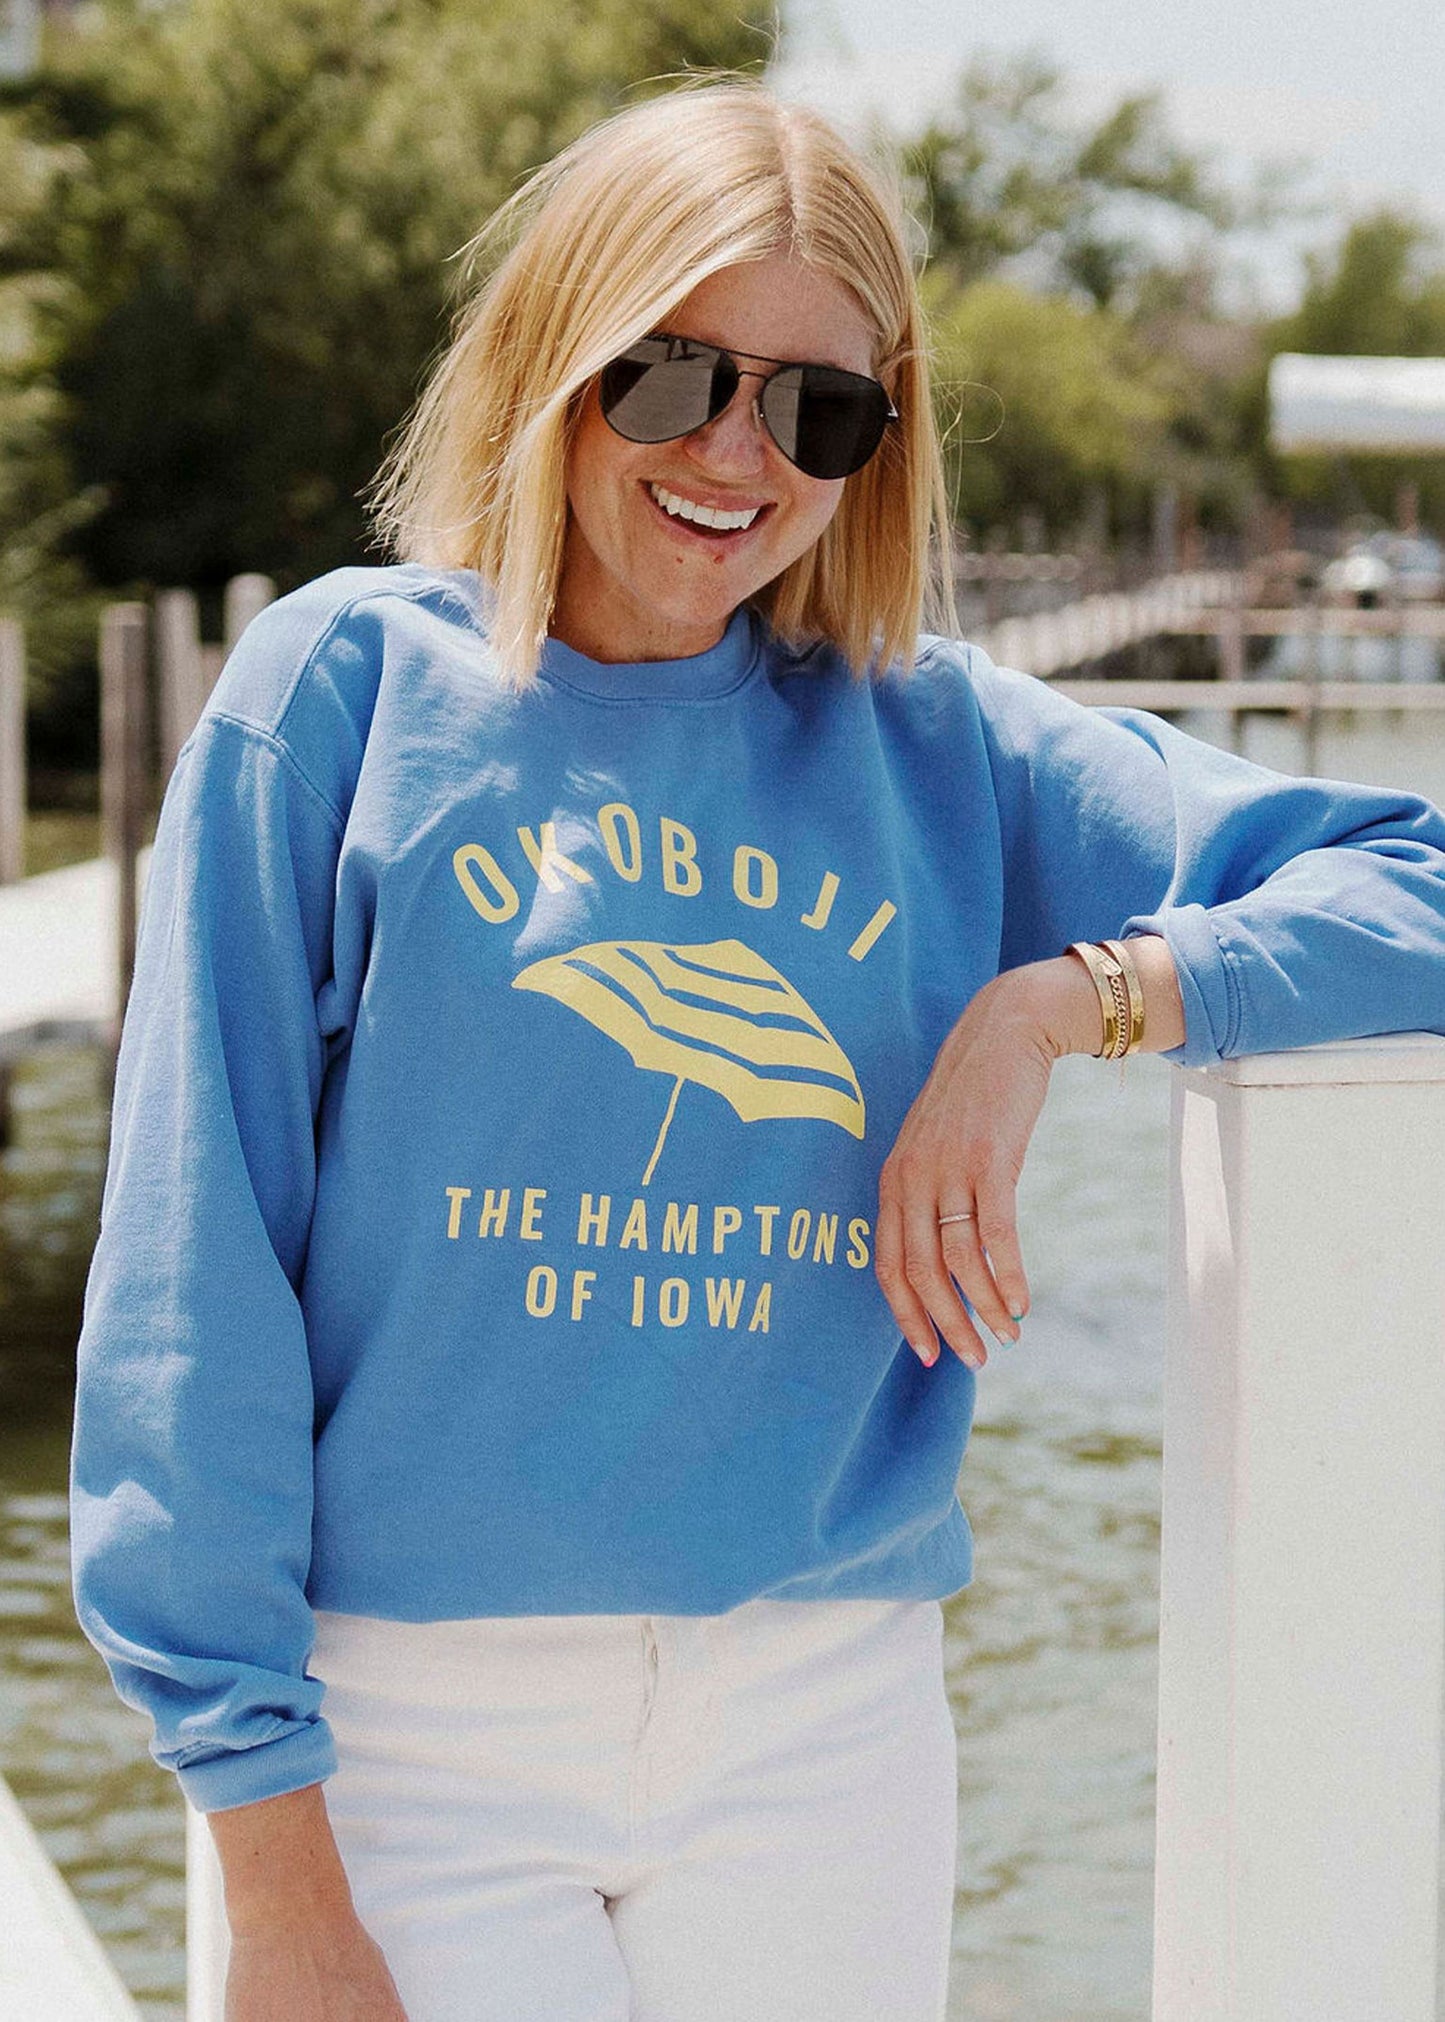 TOPS – Boat House Apparel